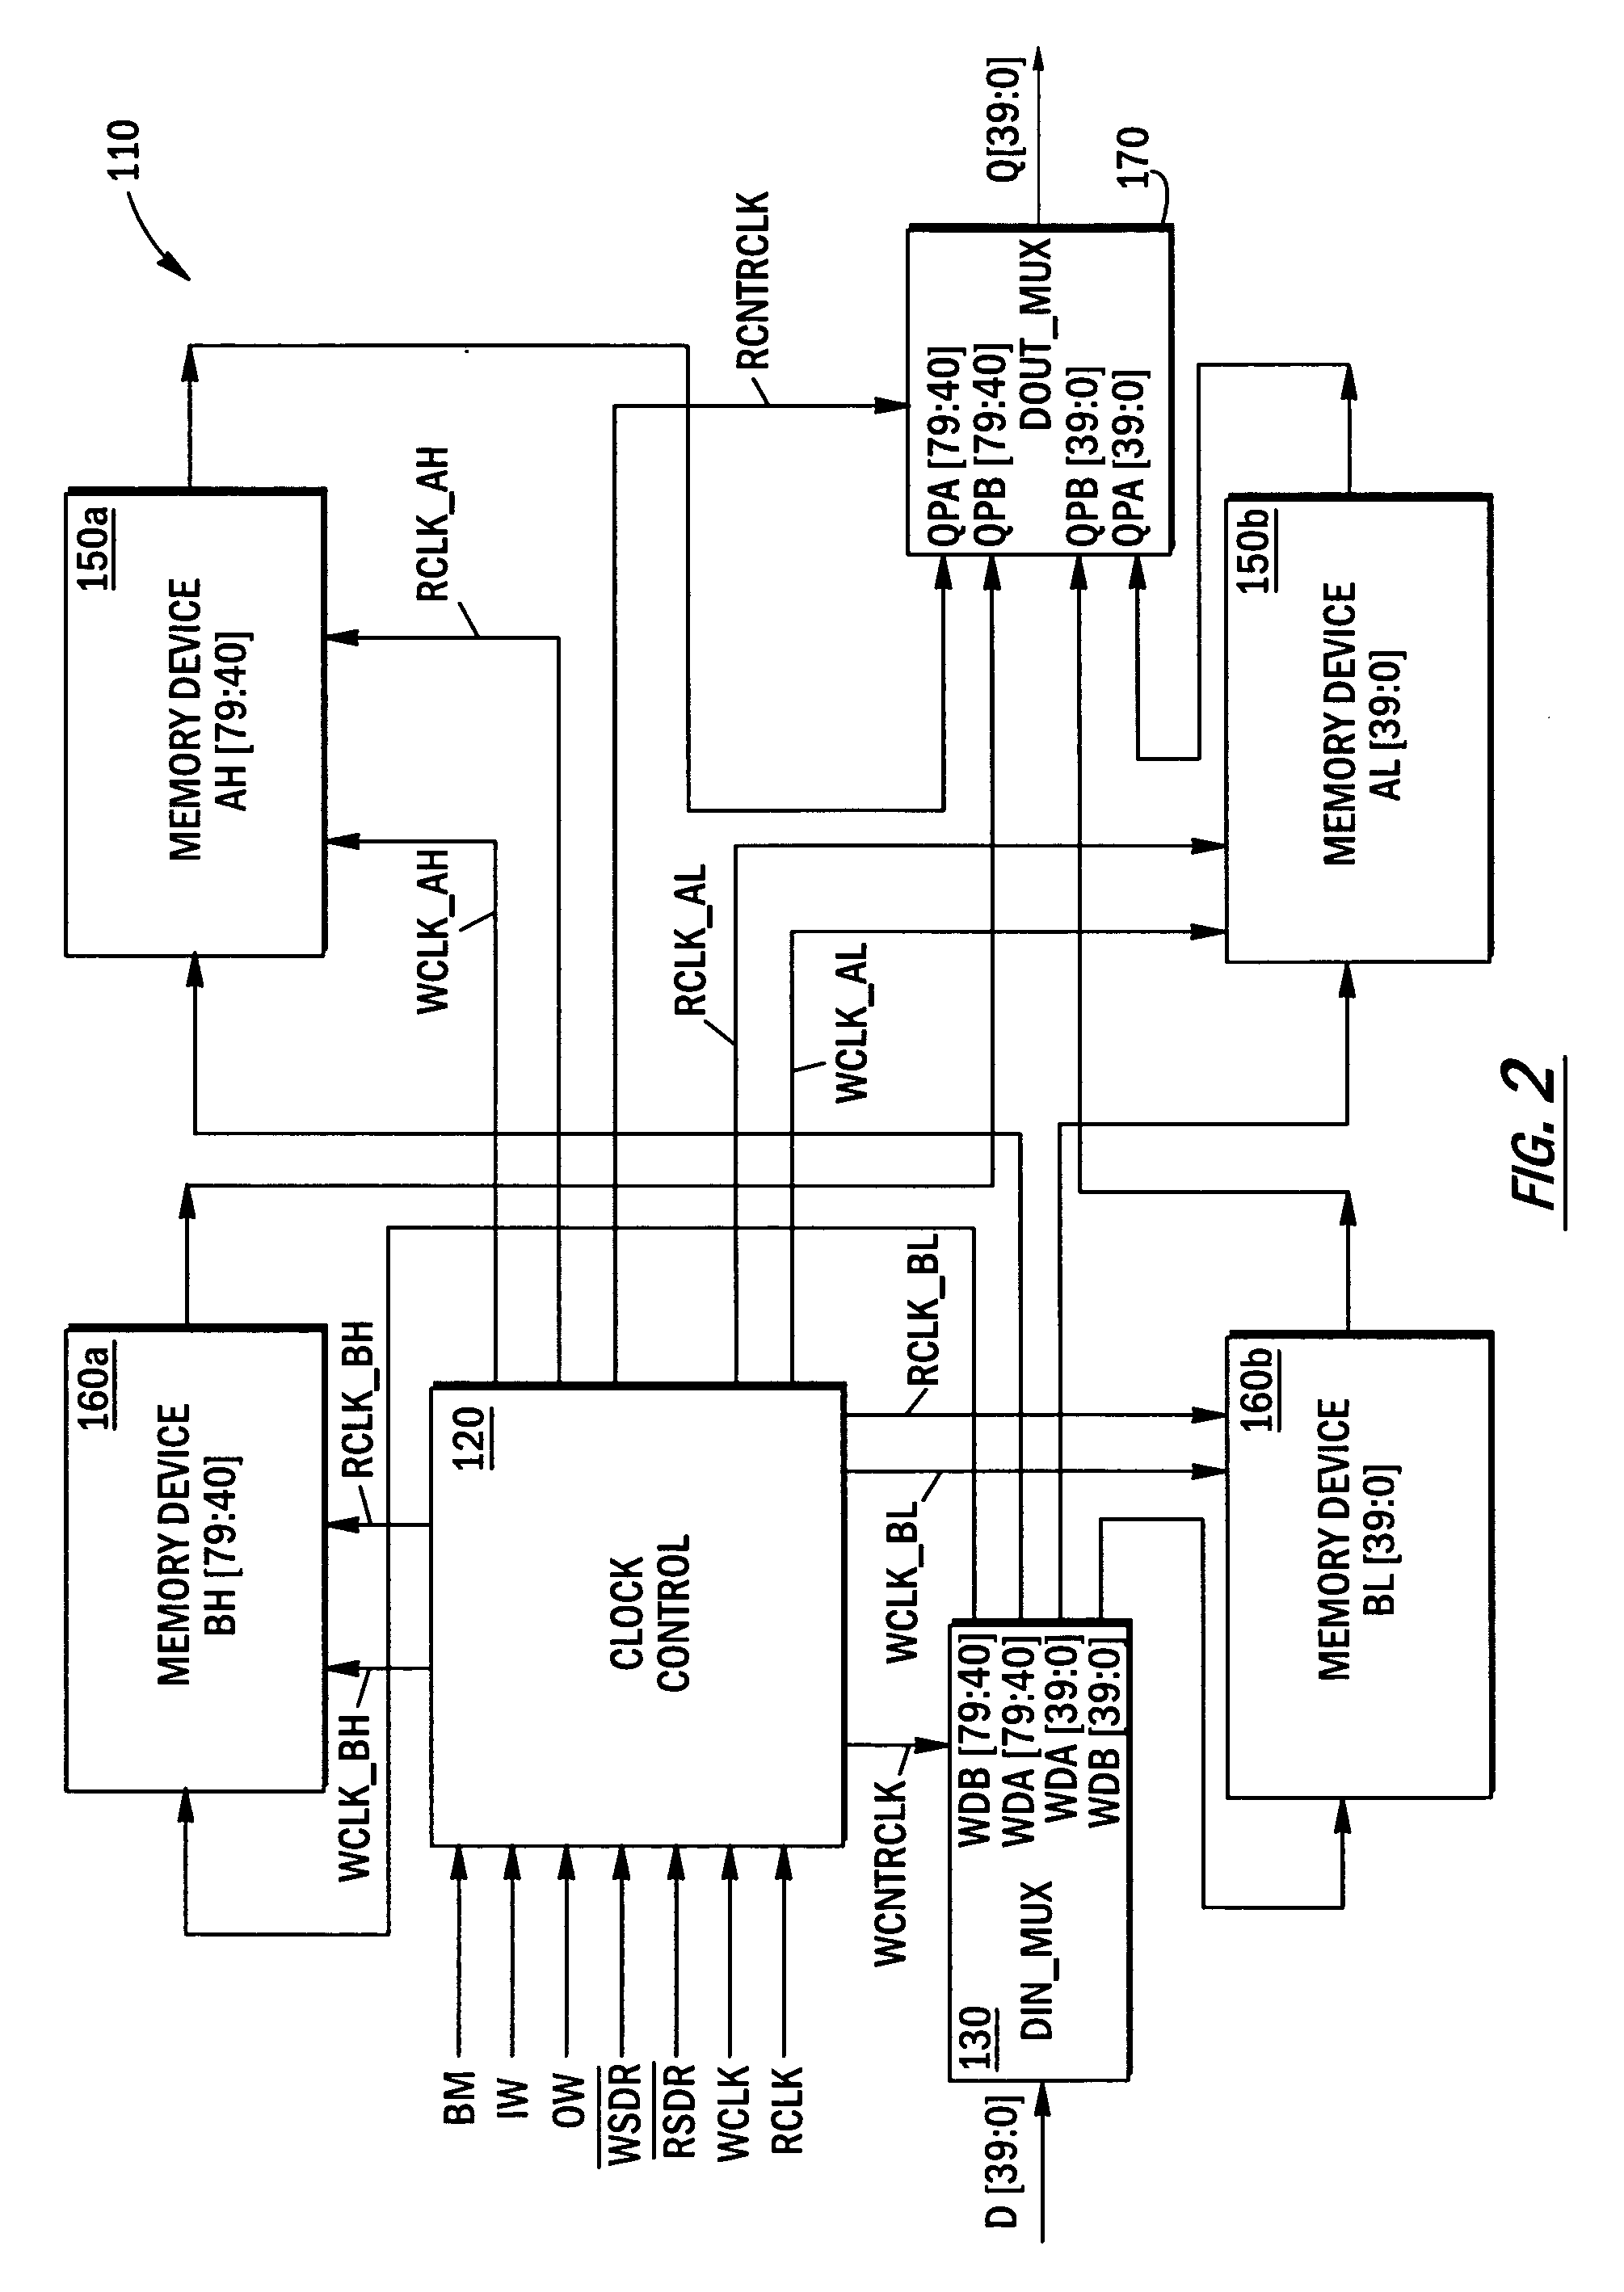 FIFO memory devices having write and read control circuits that support x4N, x2N and xN data widths during DDR and SDR modes of operation